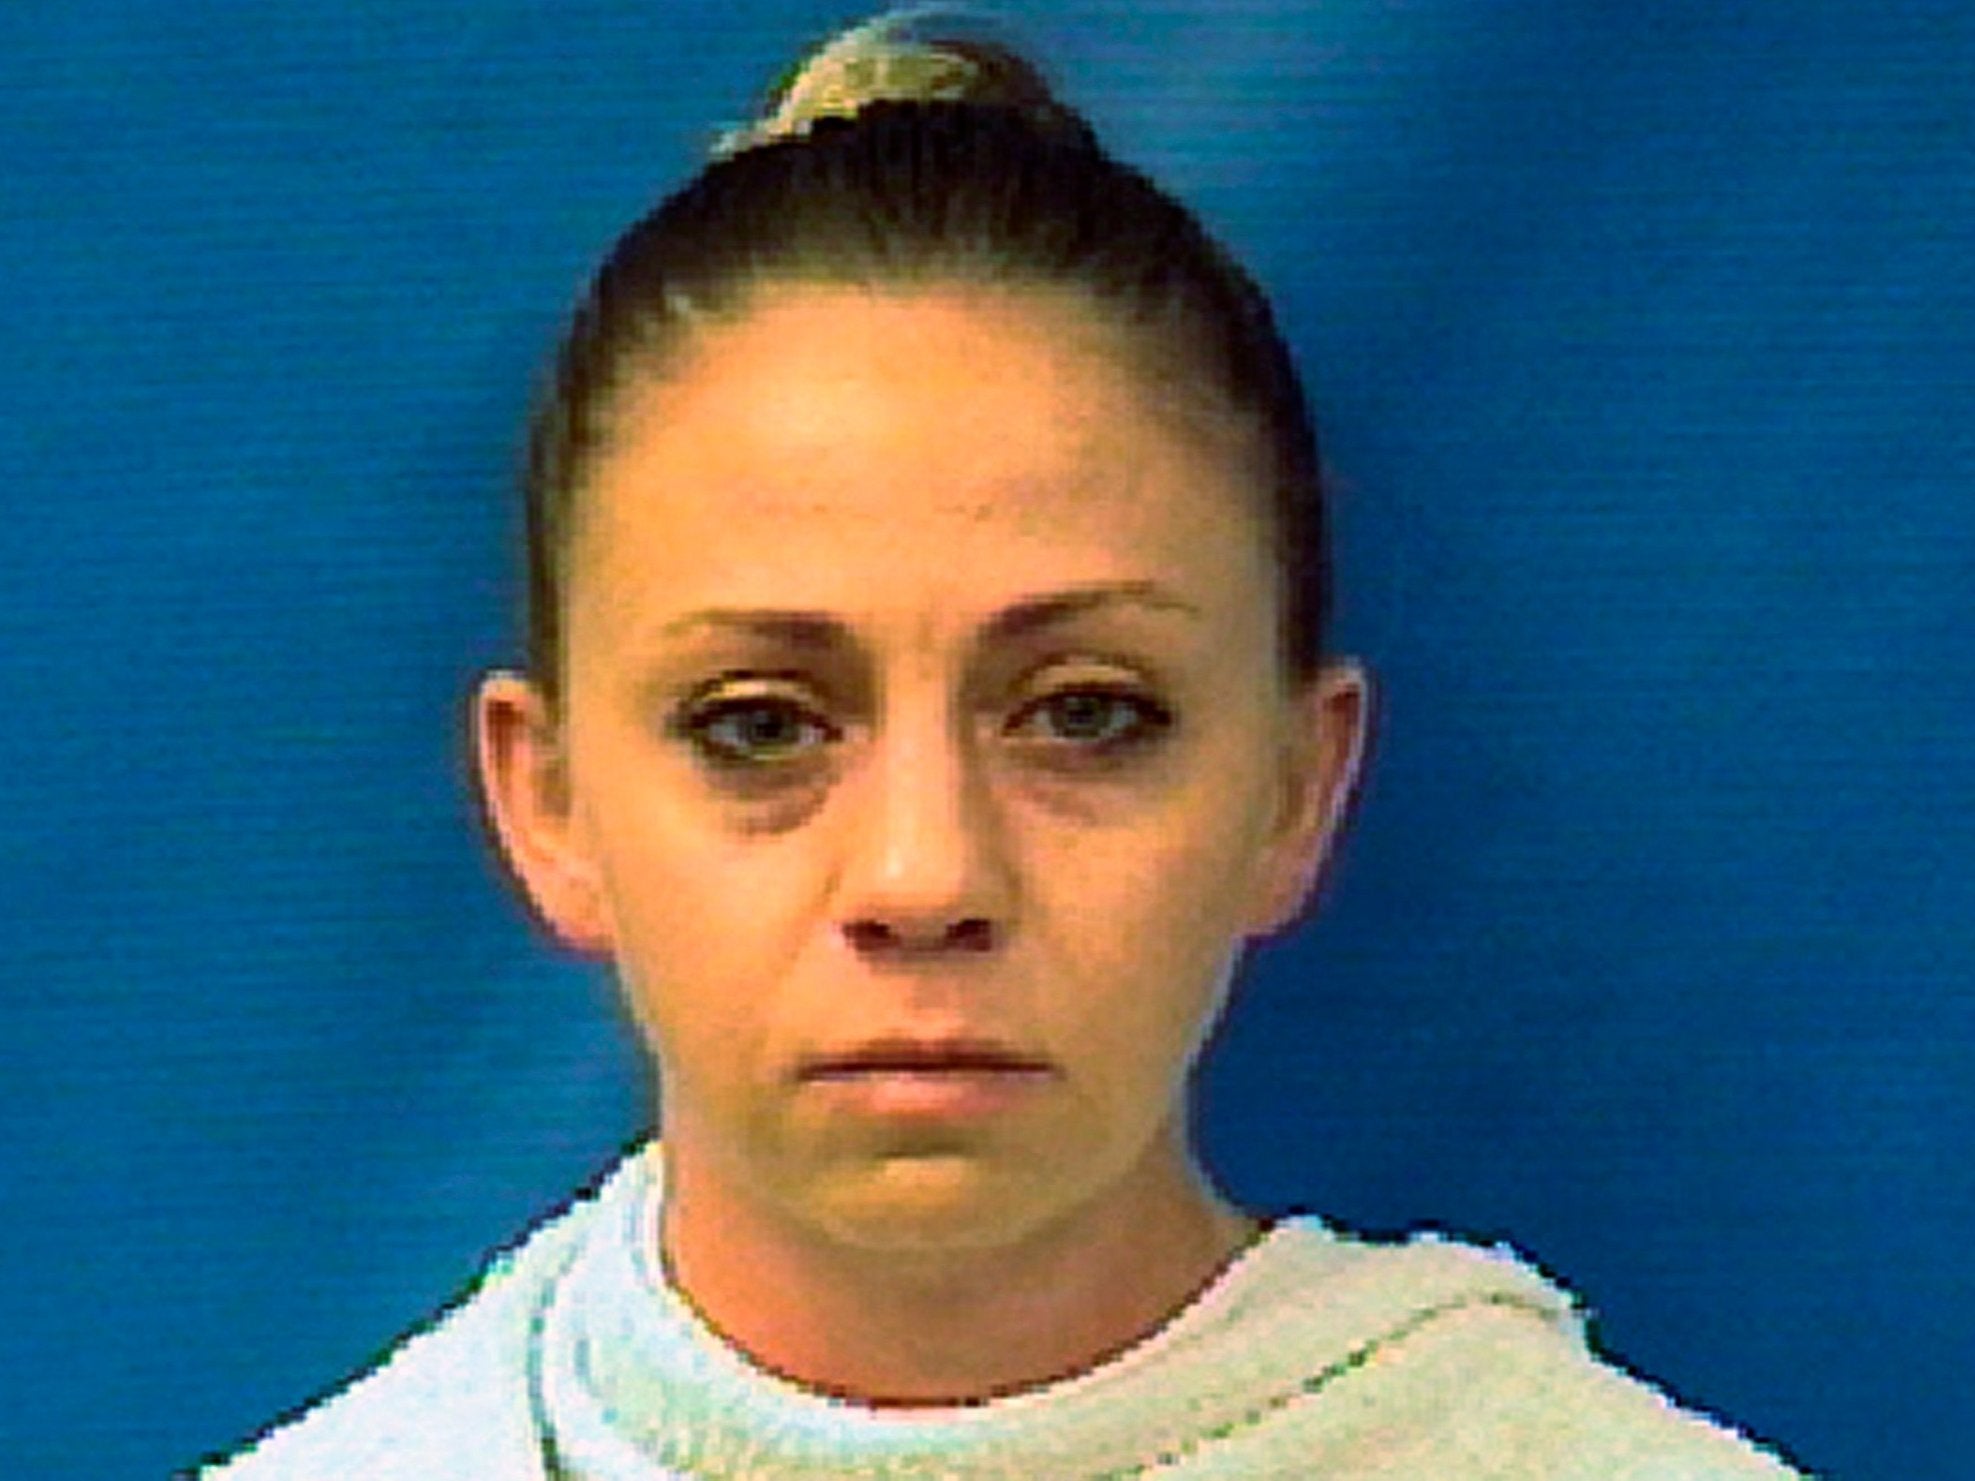 Amber Guyger was fired by the Dallas Police after she killed Botham Jean.